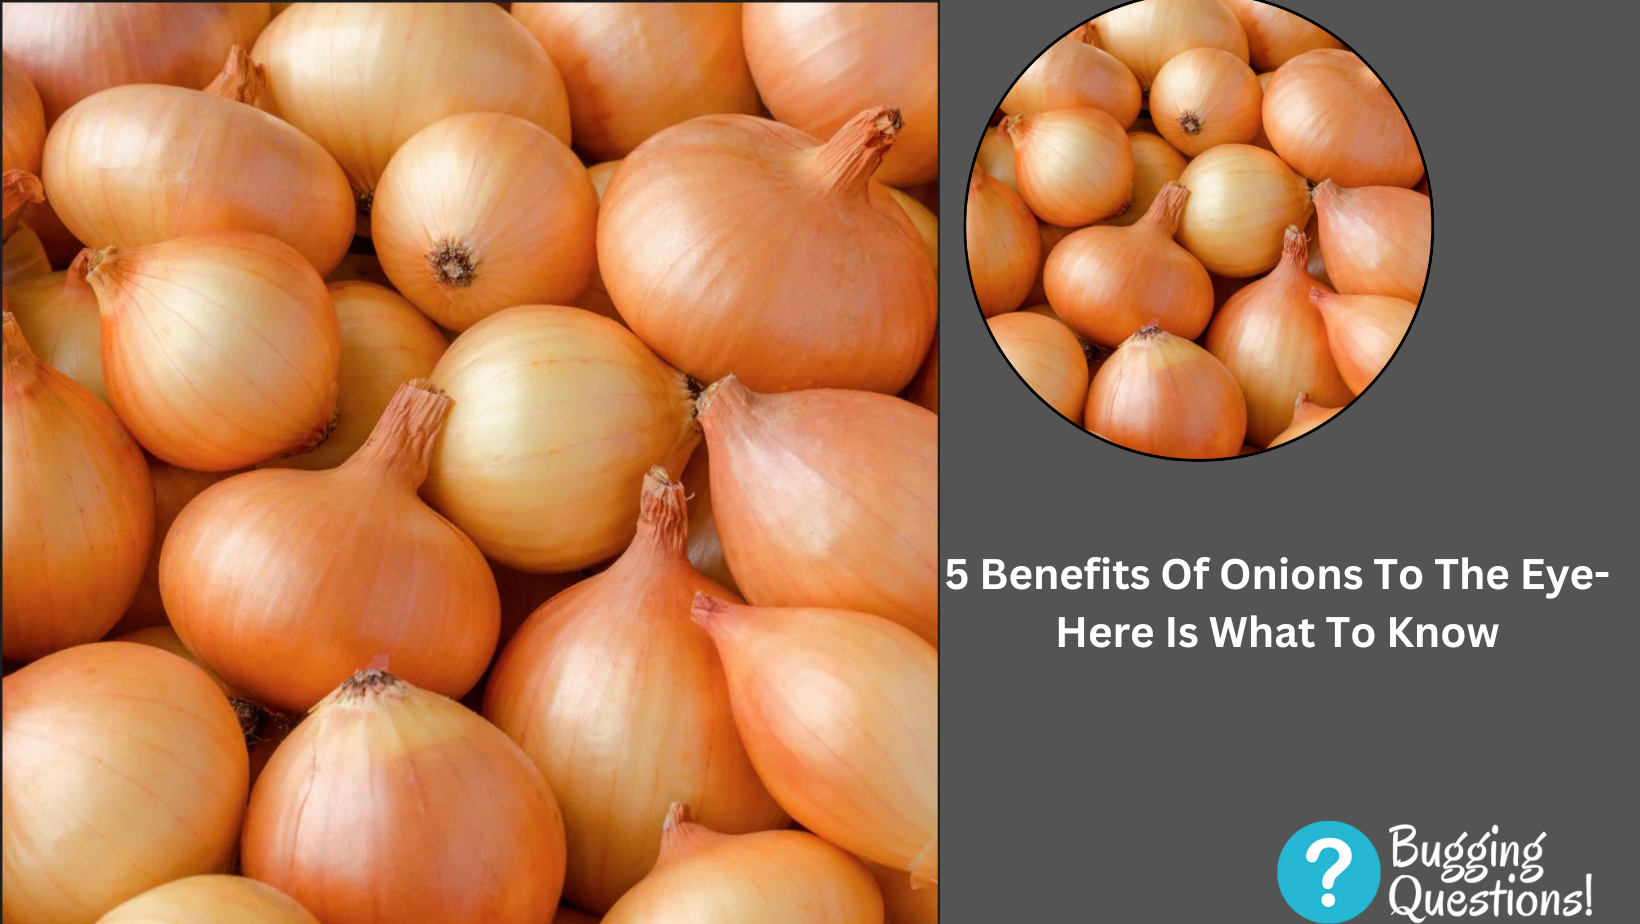 Benefits Of Onions To The Eye